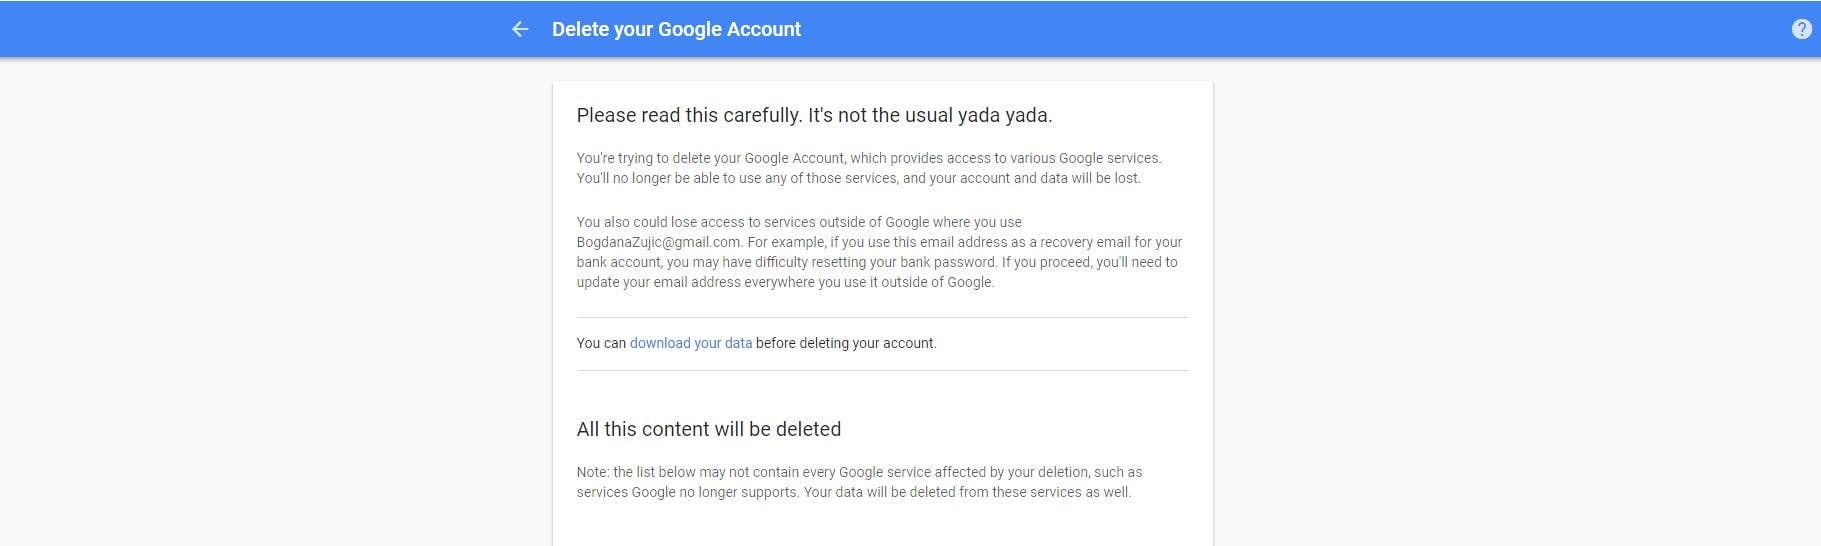 How To Delete Your Google Account featured image